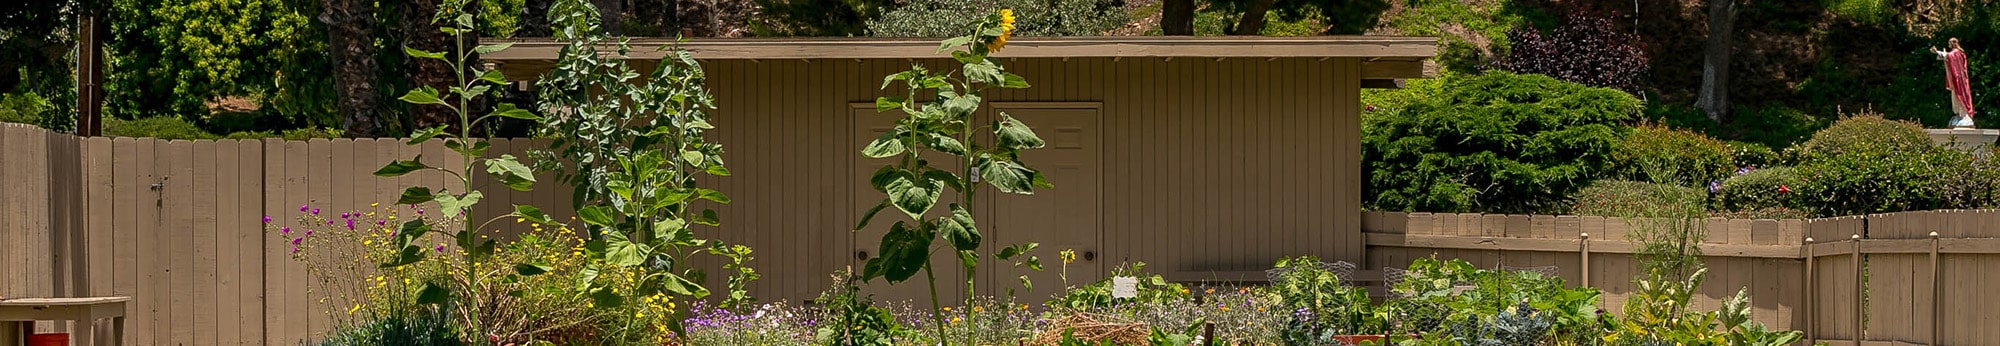 garden in front a of shed at Nazareth School